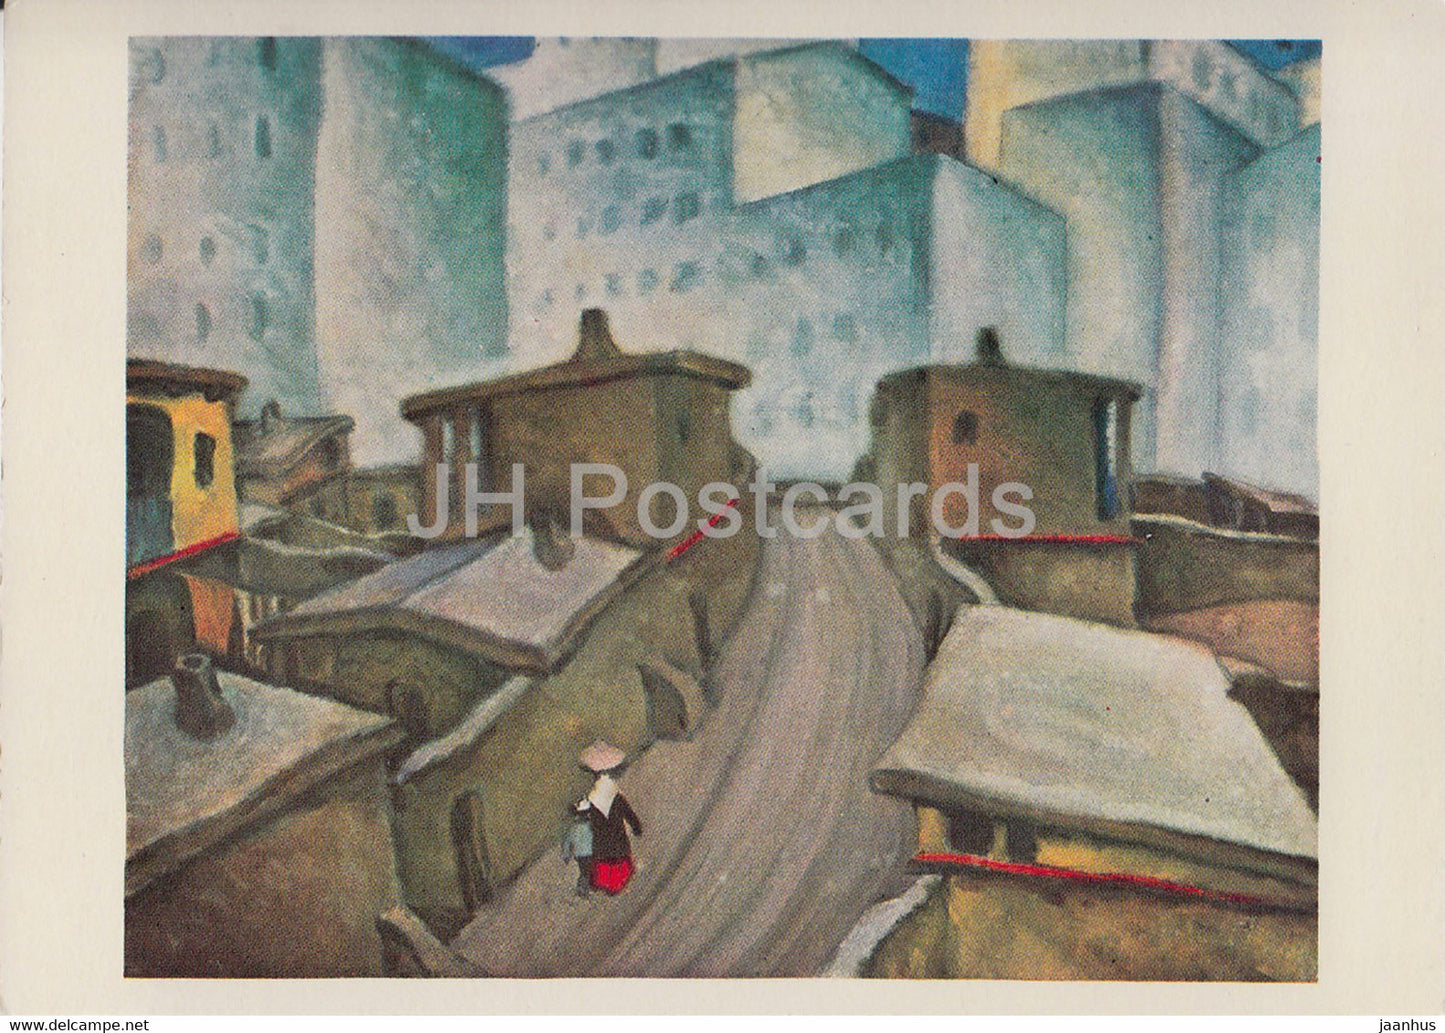 across Kyrgyzstan by V. Rogachev - Time contrasts - illustration - 1979 - Russia USSR - unused - JH Postcards